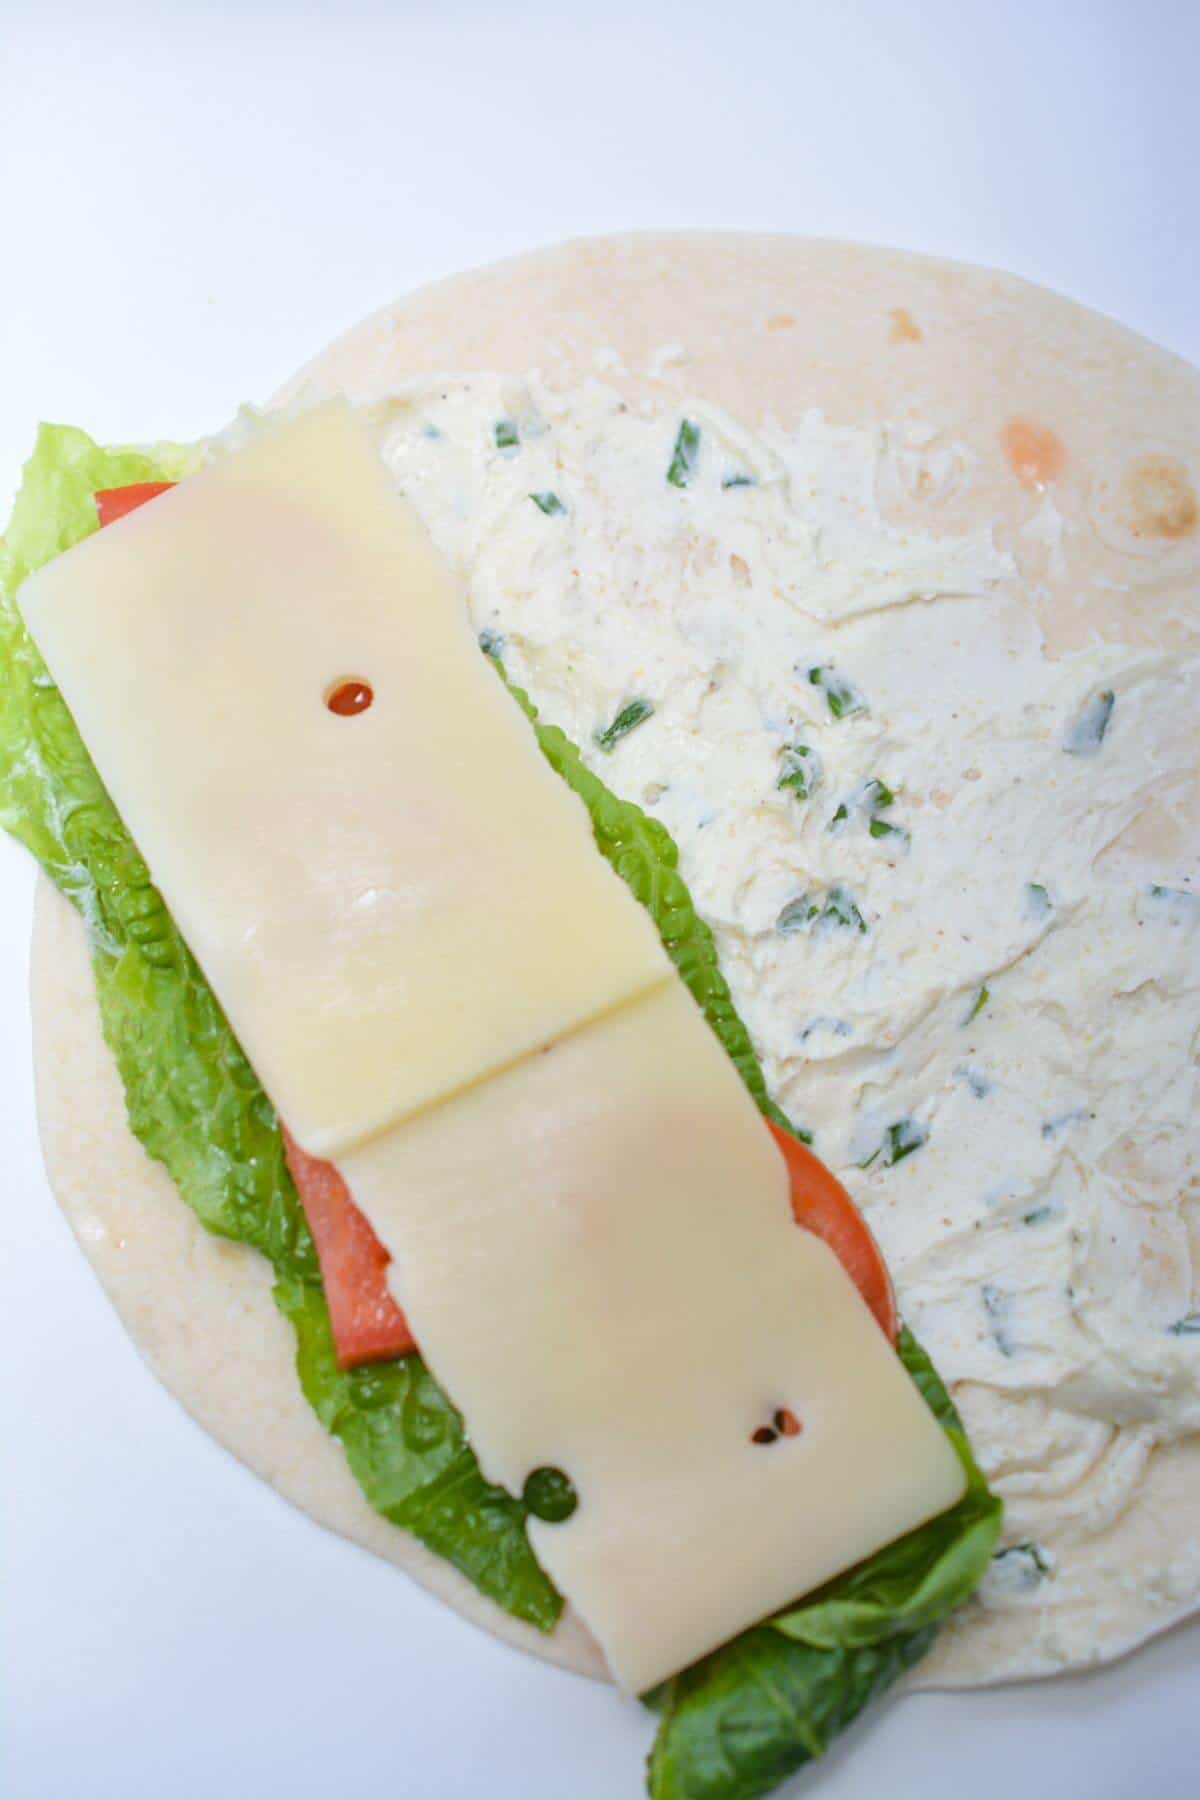 A tortilla with cheese, lettuce and tomatoes.